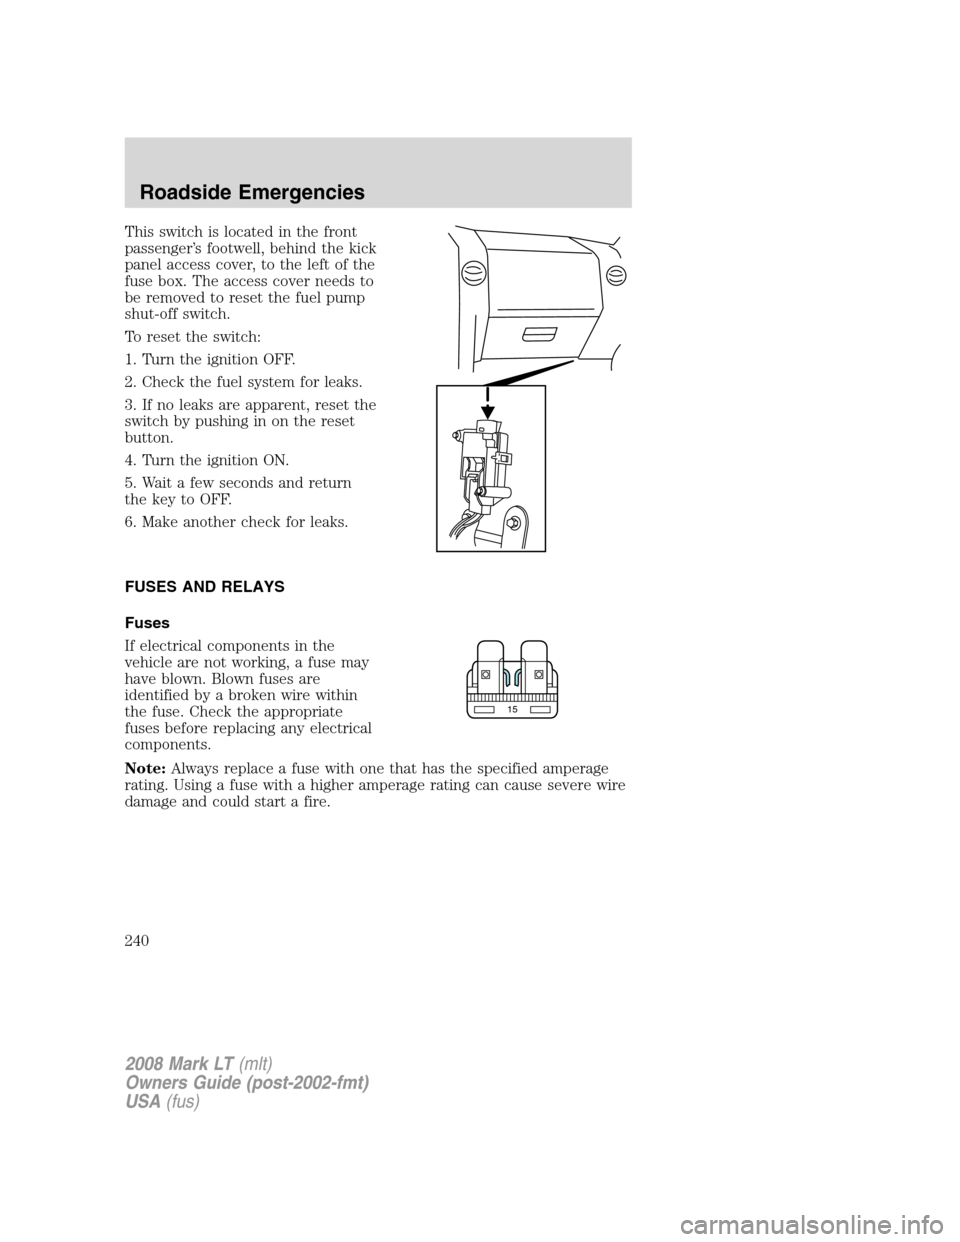 LINCOLN MARK LT 2008  Owners Manual This switch is located in the front
passenger’s footwell, behind the kick
panel access cover, to the left of the
fuse box. The access cover needs to
be removed to reset the fuel pump
shut-off switch